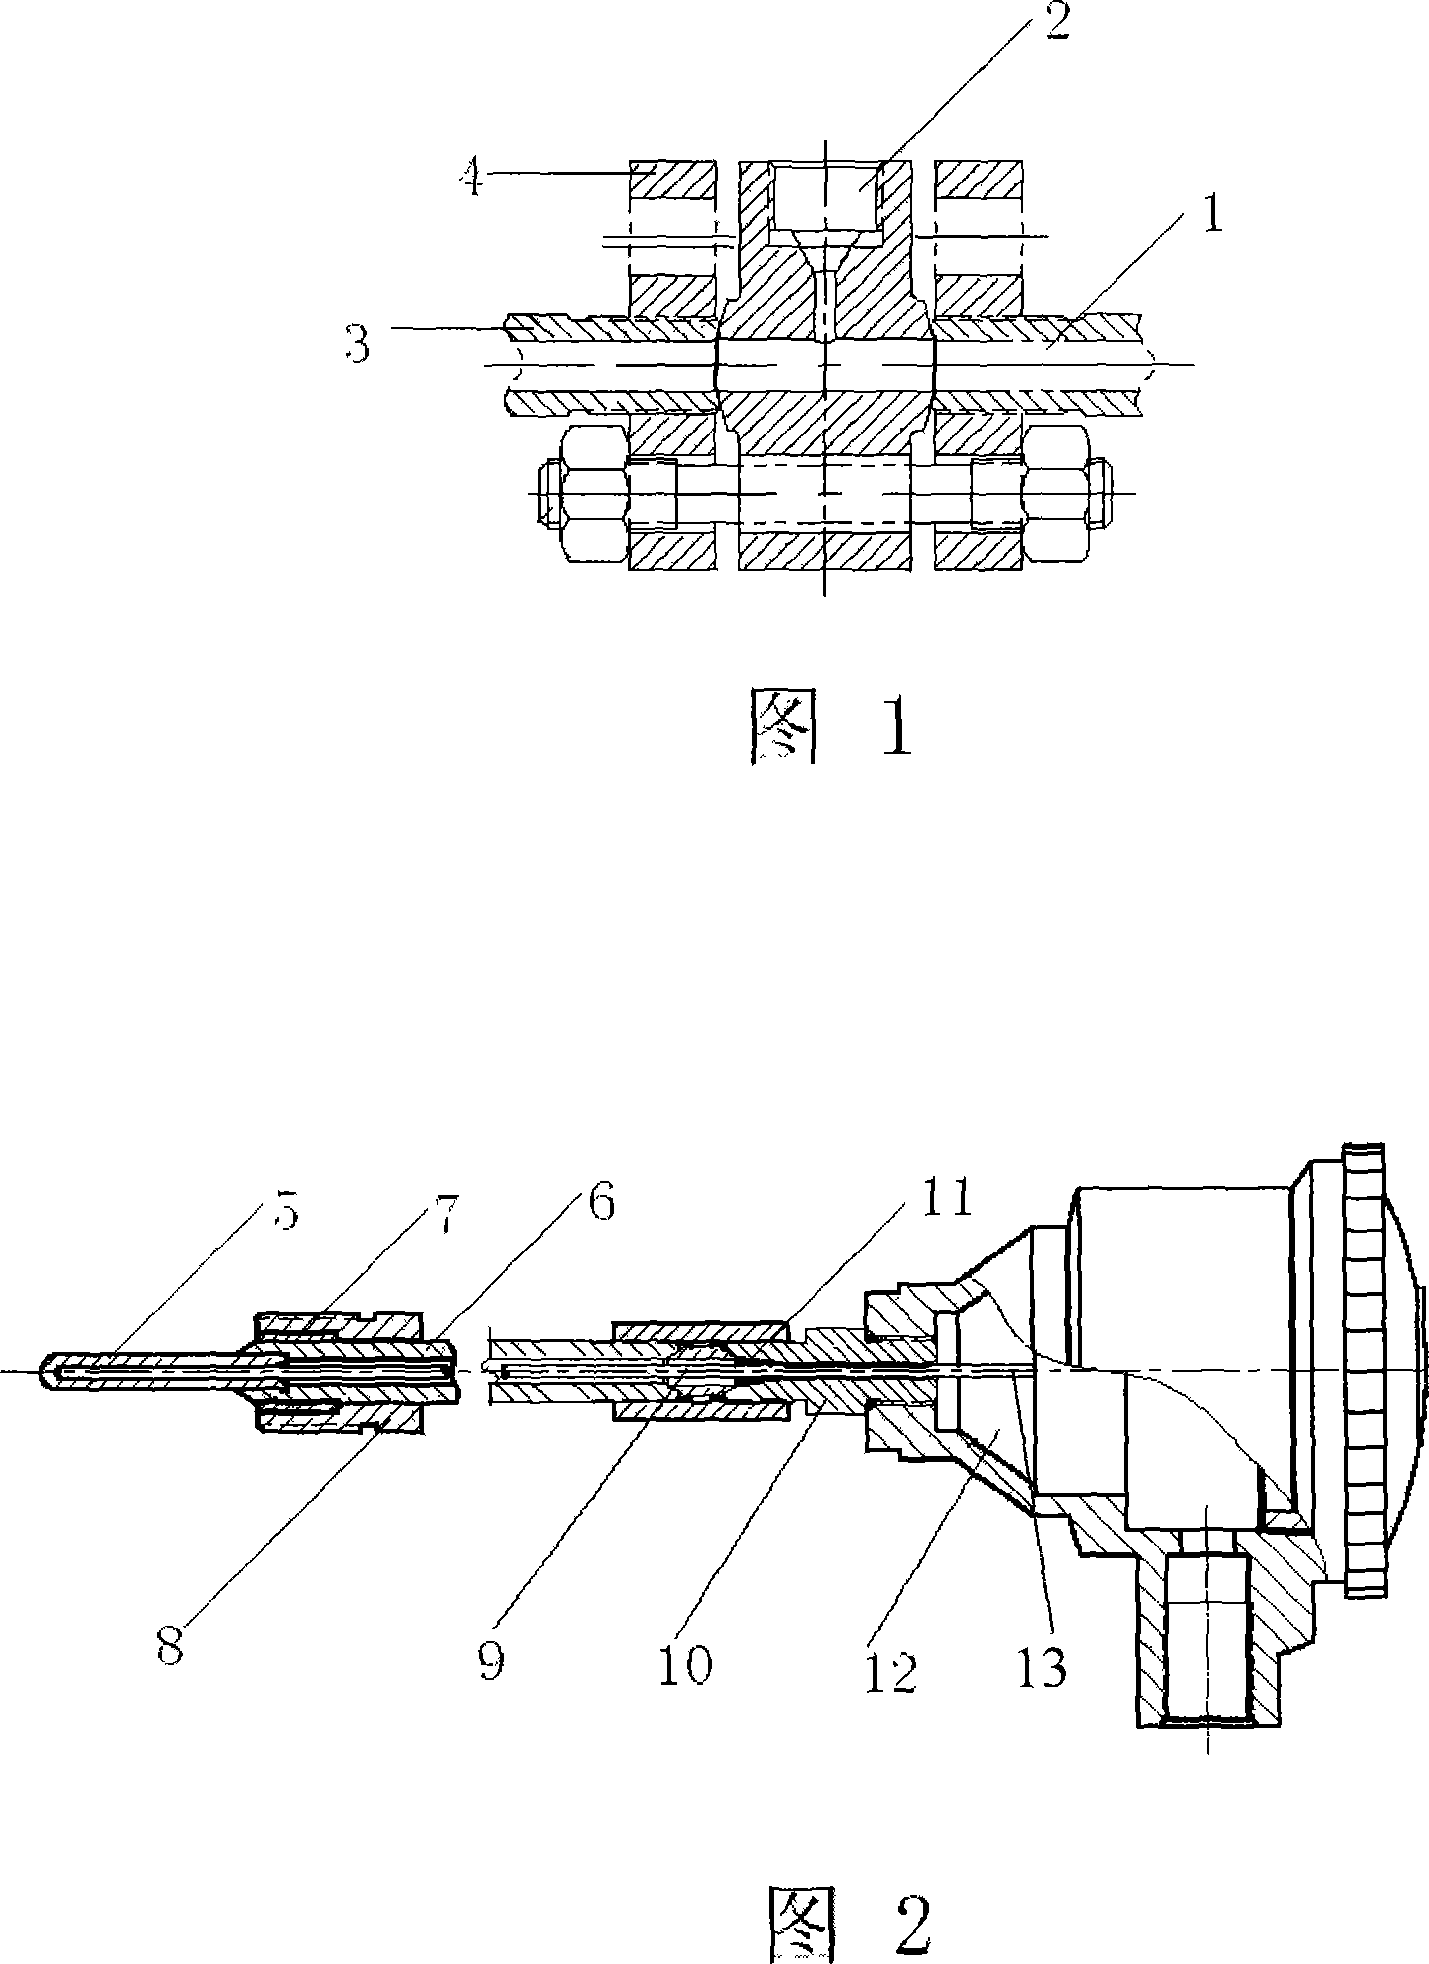 High-pressure source removing device